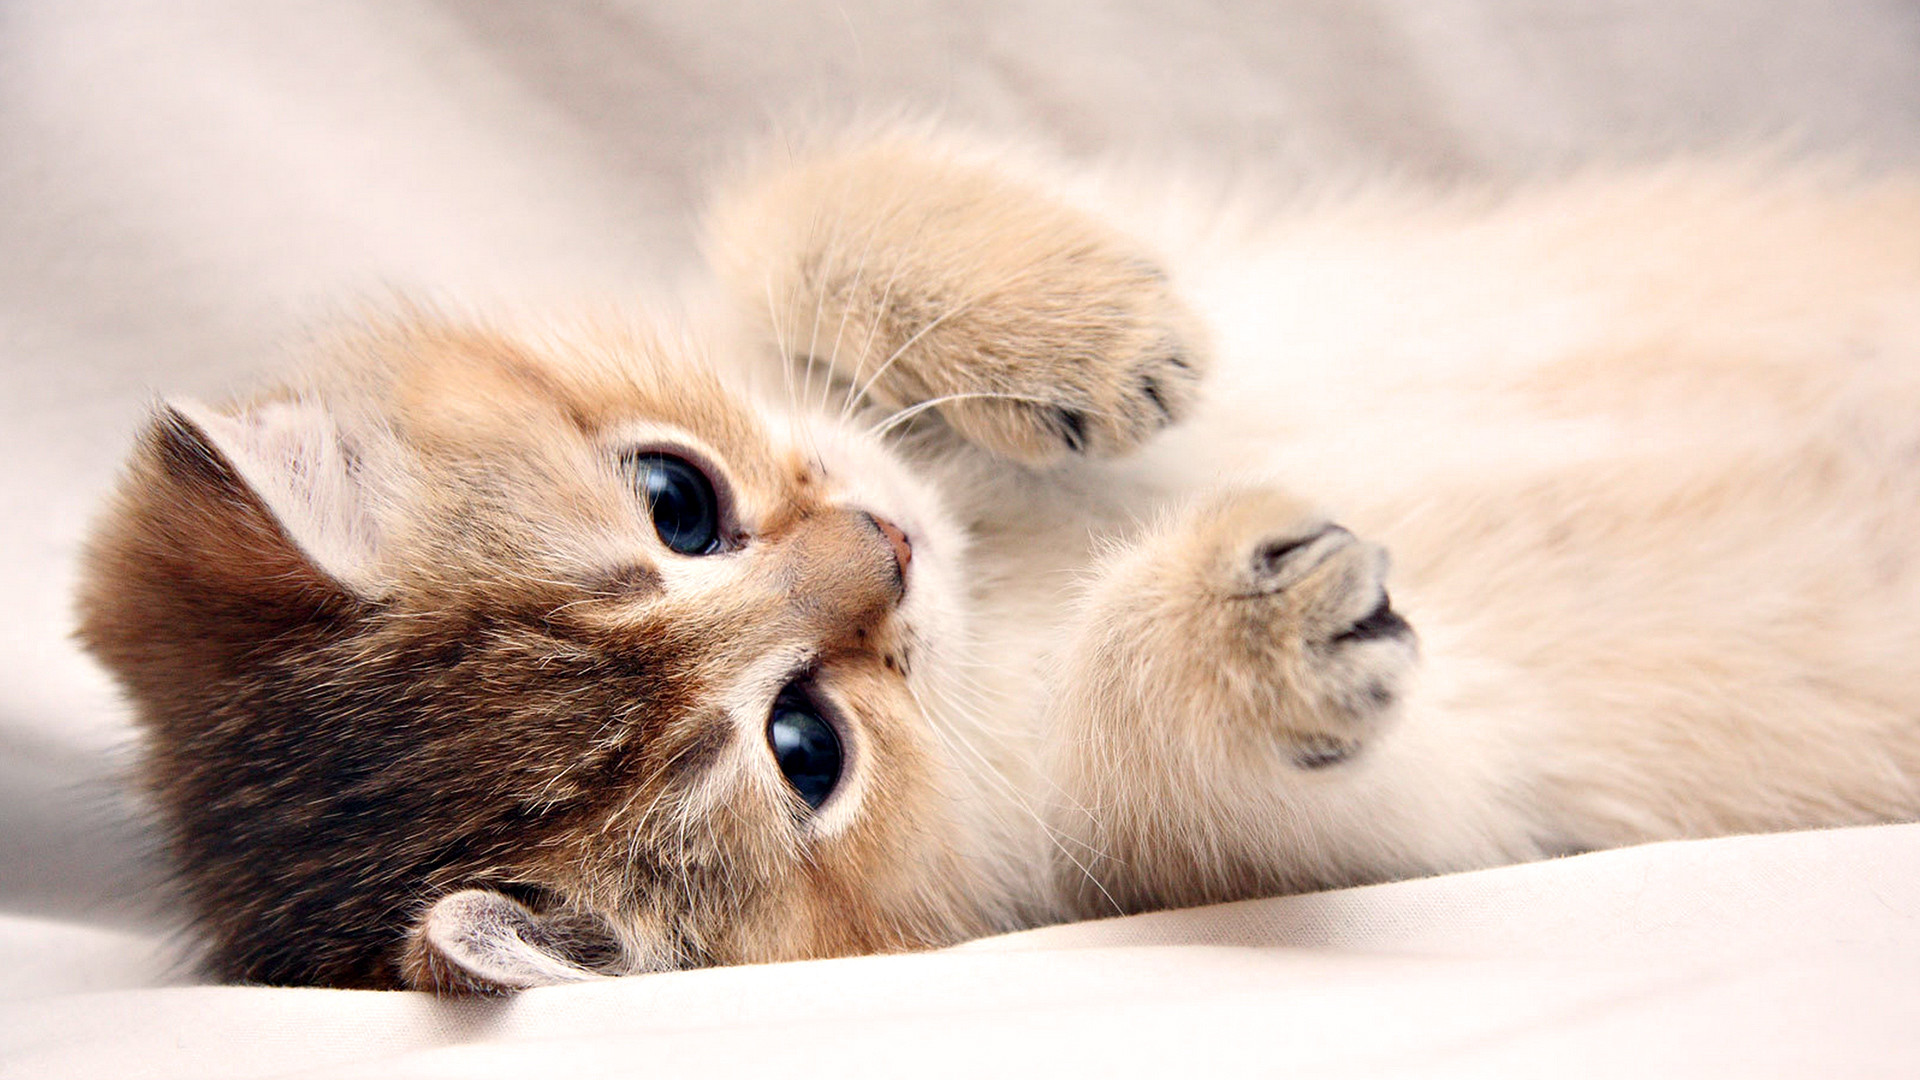 1920x1080 Kittens images adorable kittens HD wallpaper and background photos